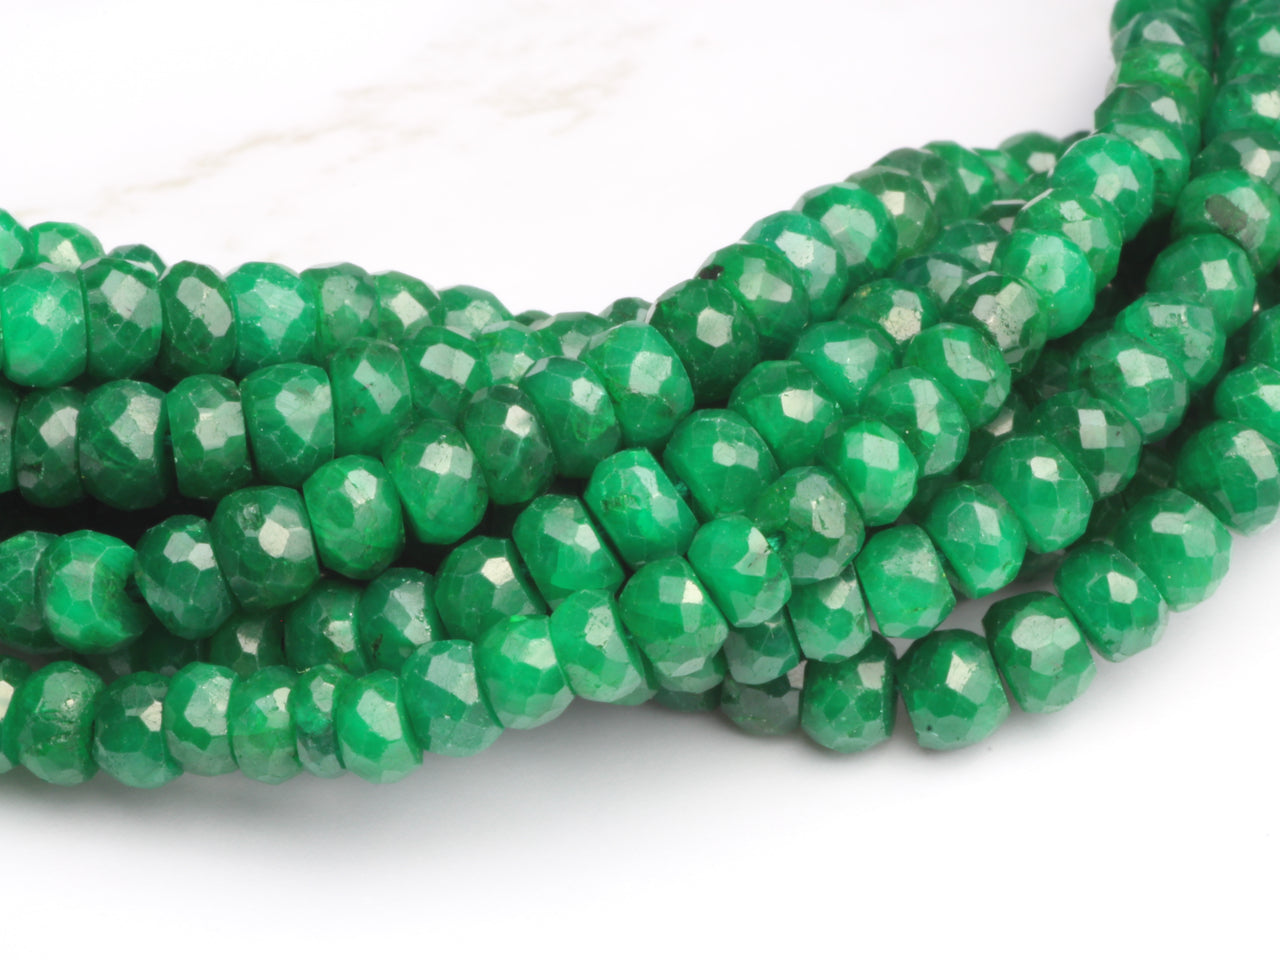 Green Emerald 4mm Faceted Rondelles